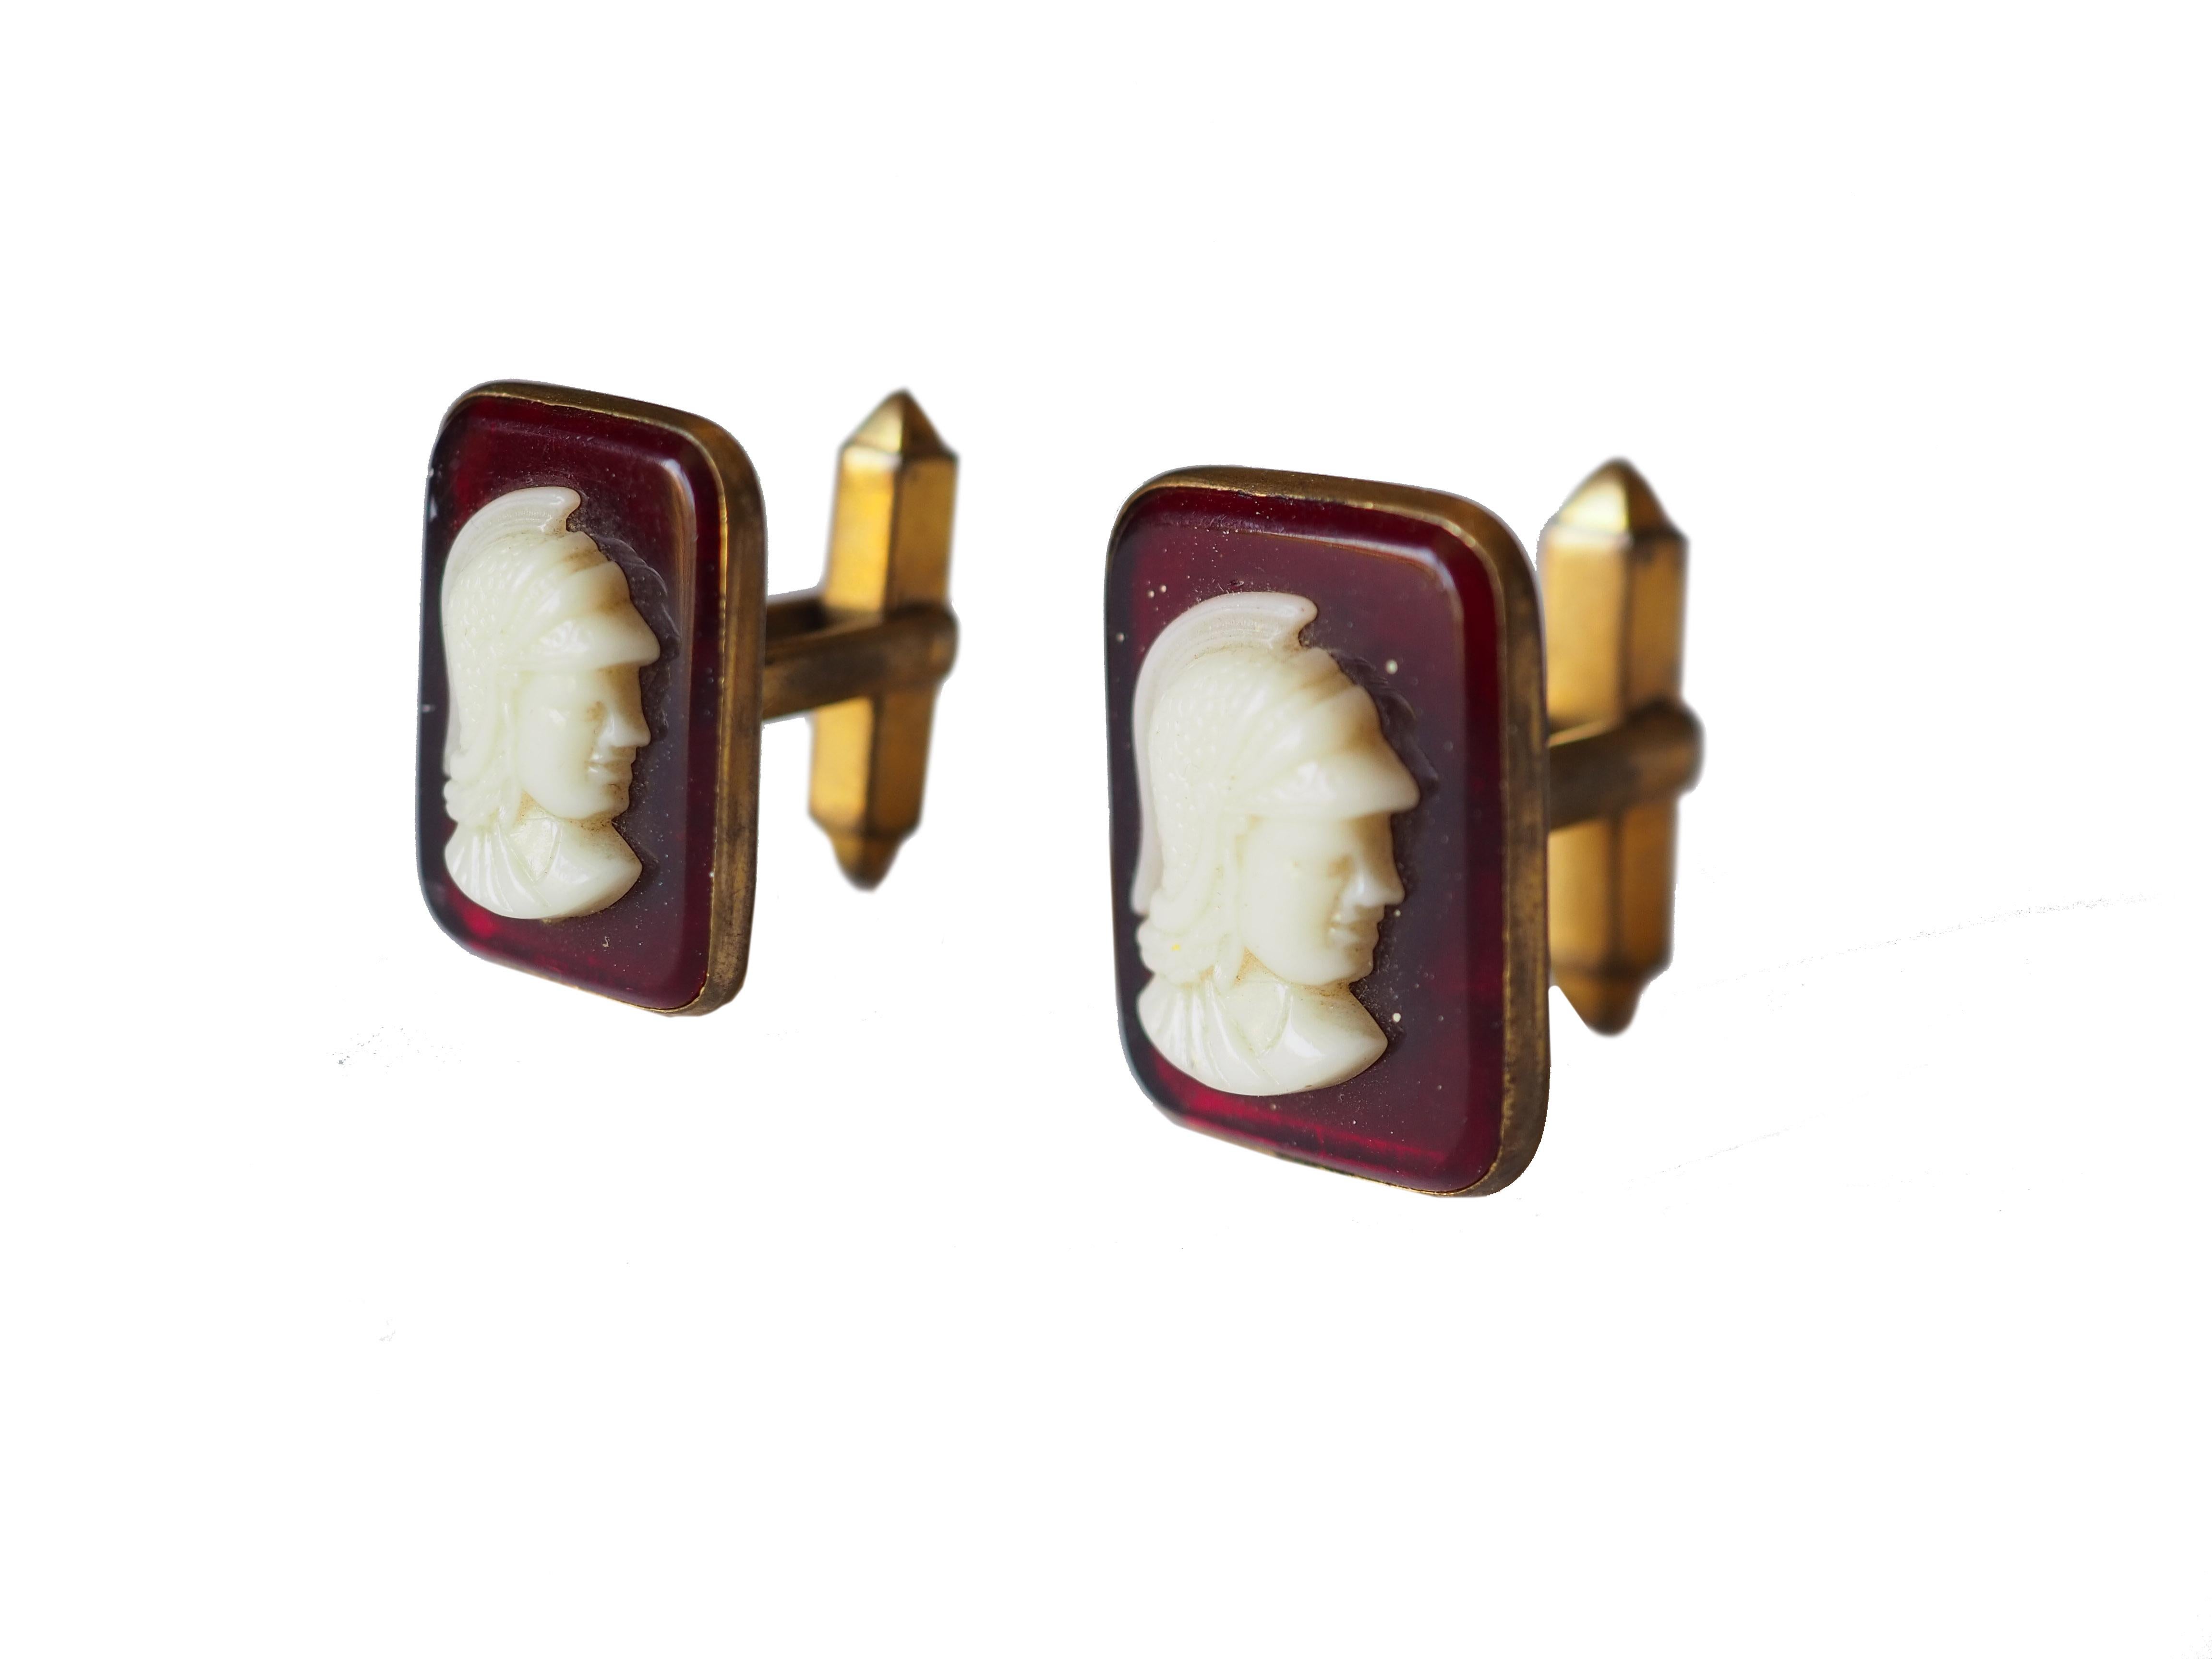 Cameo Cufflinks glass paste, measures 2x1cm
All Giulia Colussi jewelry is new and has never been previously owned or worn. Each item will arrive at your door beautifully gift wrapped in our boxes, put inside an elegant pouch or jewel box.
